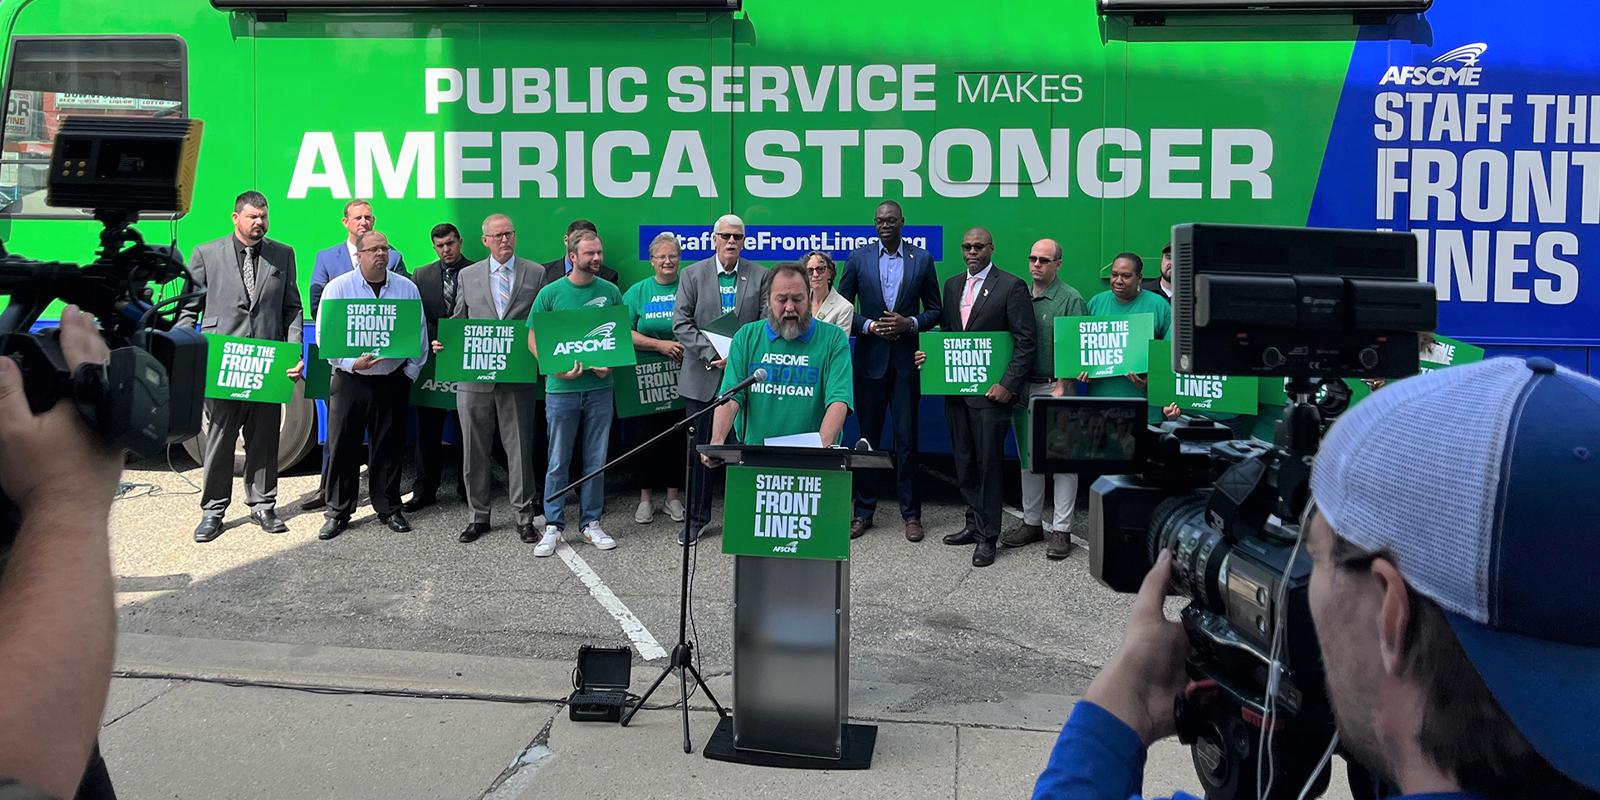 AFSCME Staff the Front Lines bus makes second stop in Lansing, Michigan